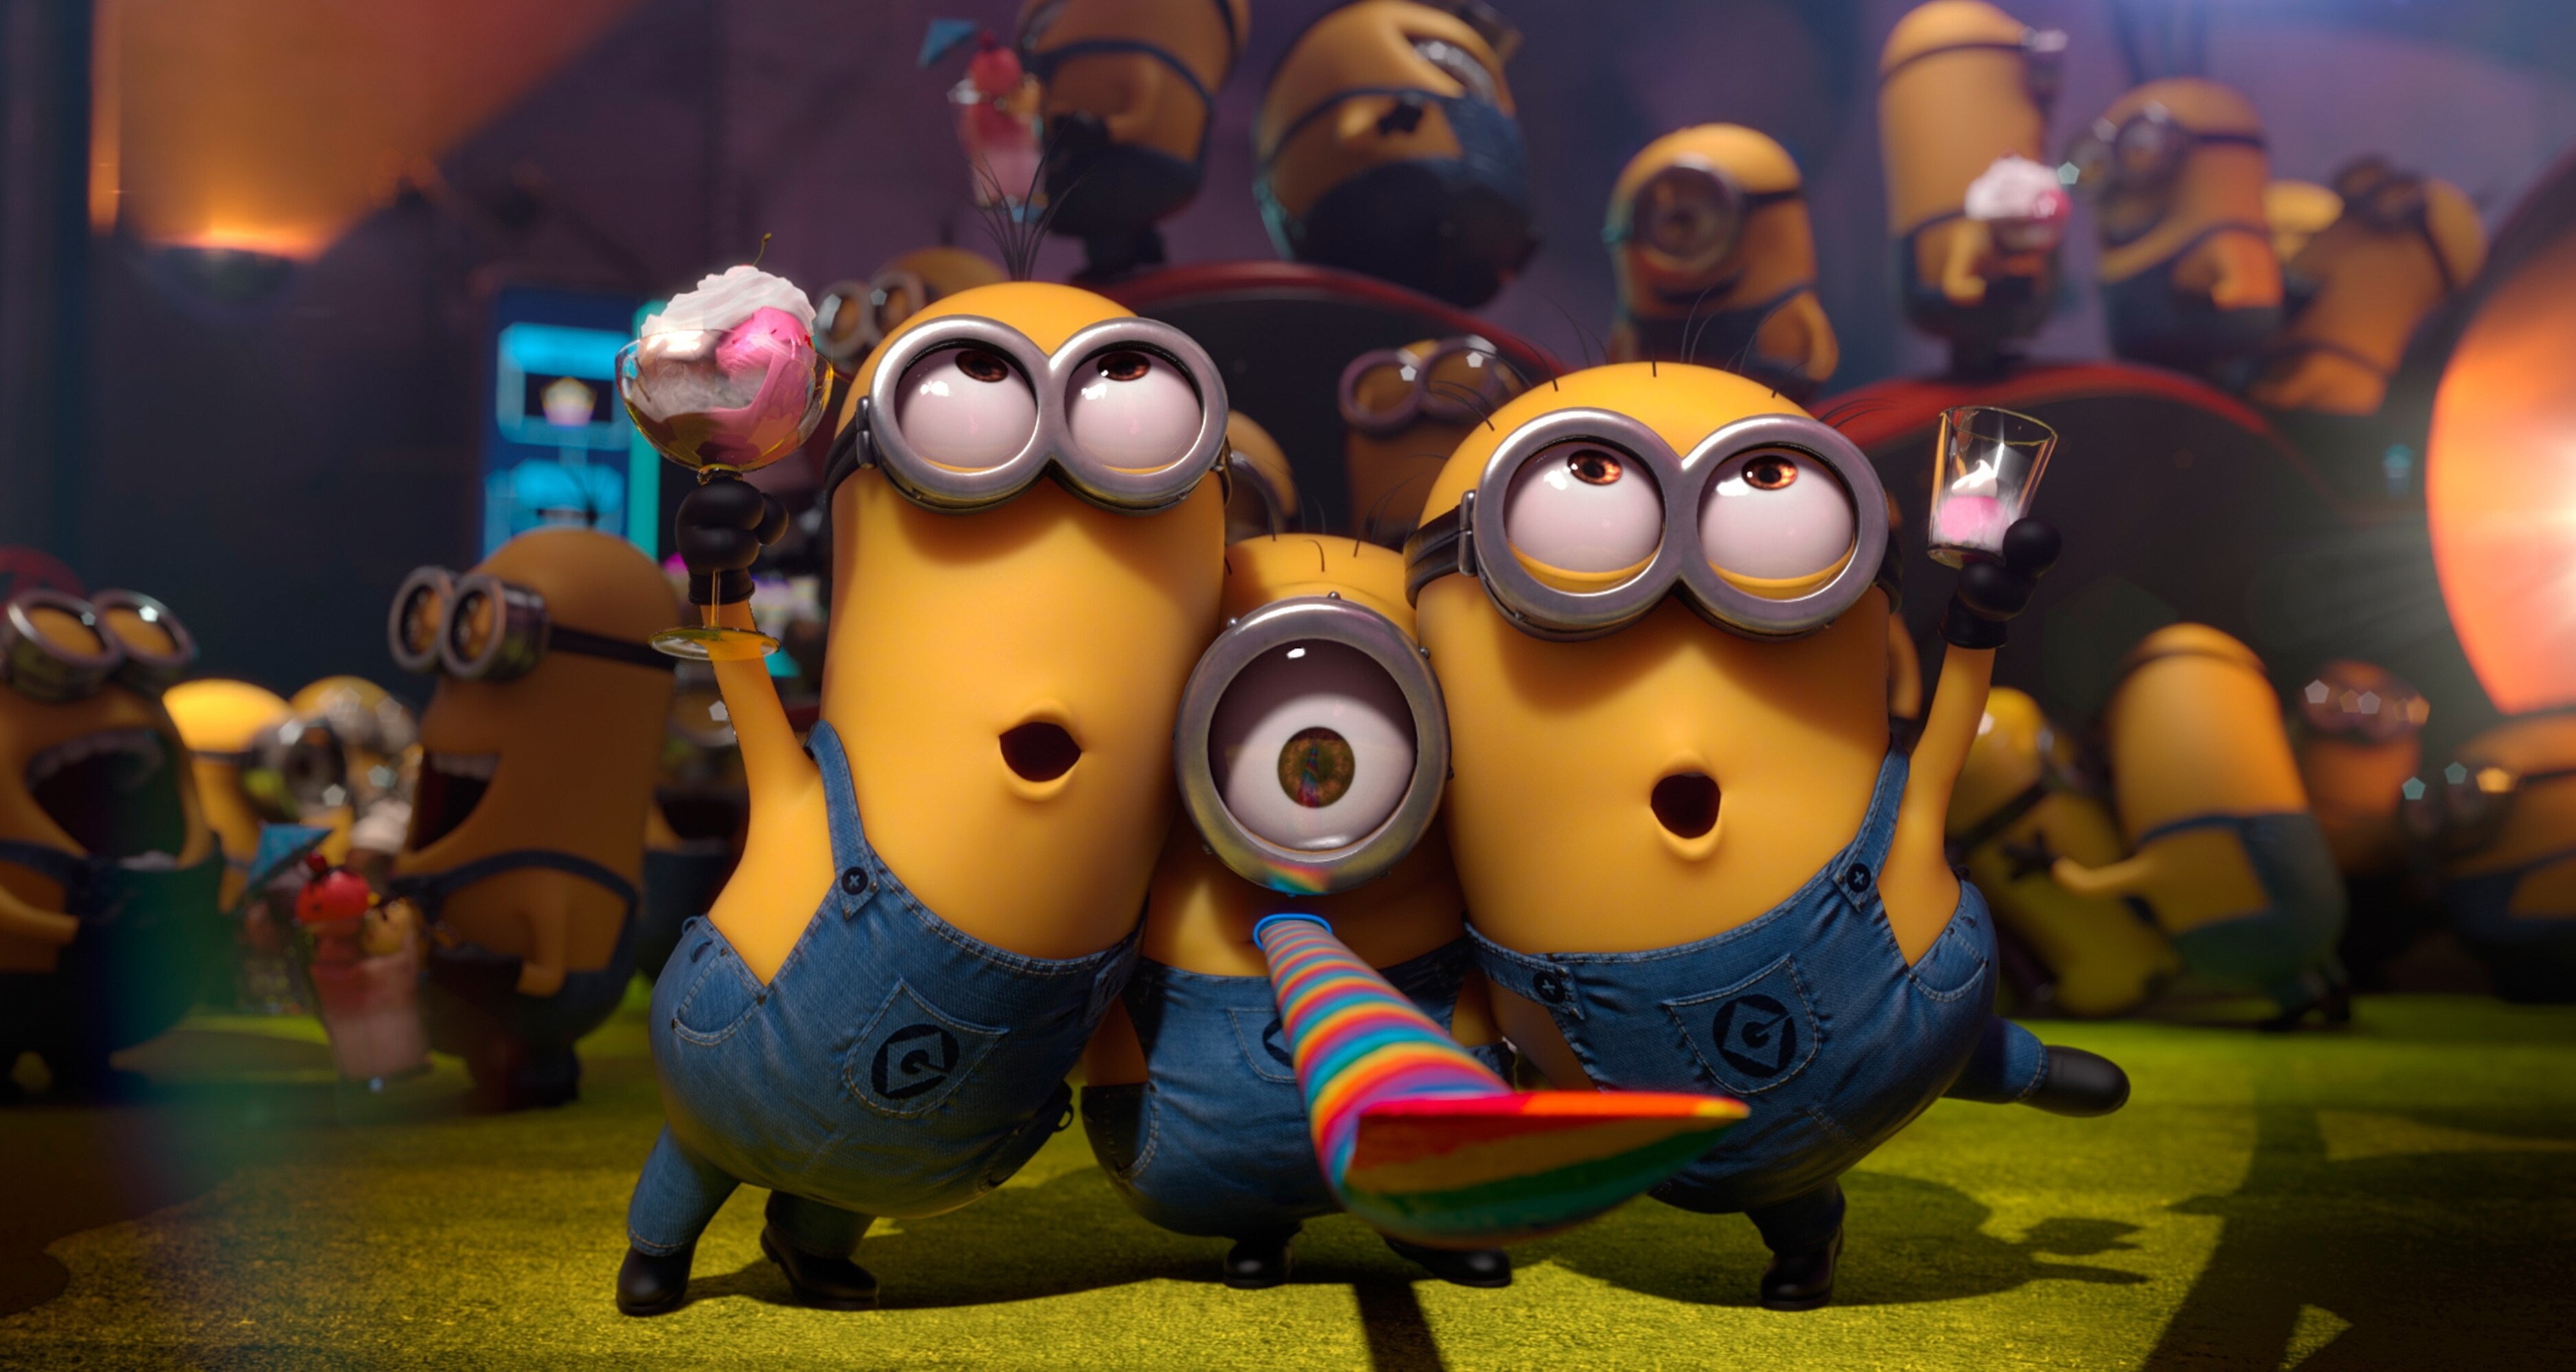 minions 4k hd image for, arts culture and entertainment, music